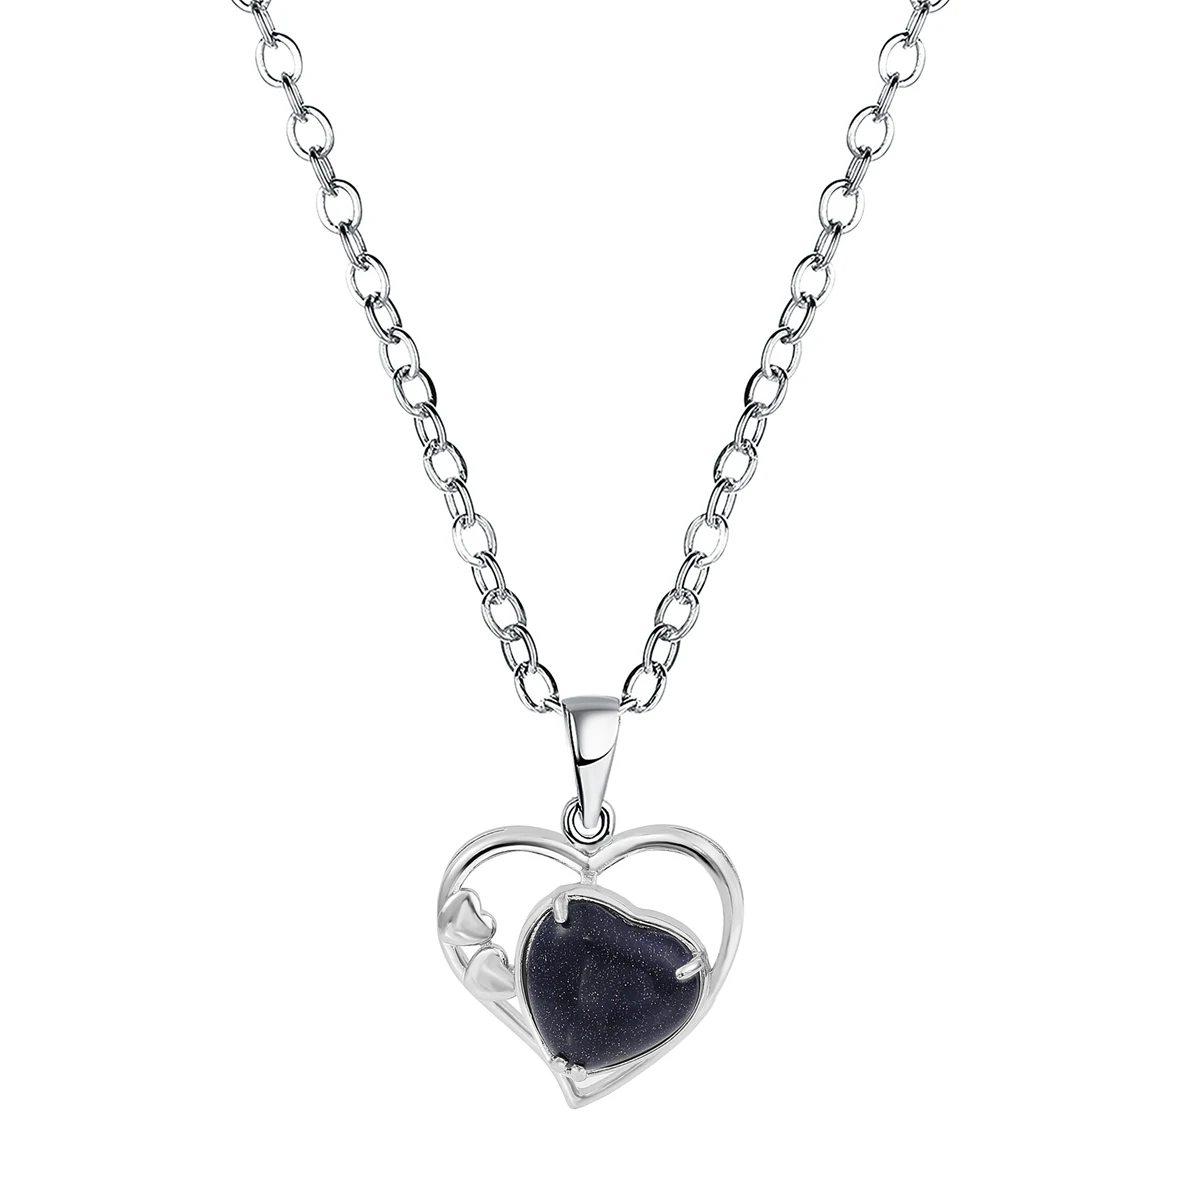 

JOYA GIFT Blue Goldstone Love Heart Birthstone Necklaces for Women Forever Crystal Pendant Jewelry Valentine's Day